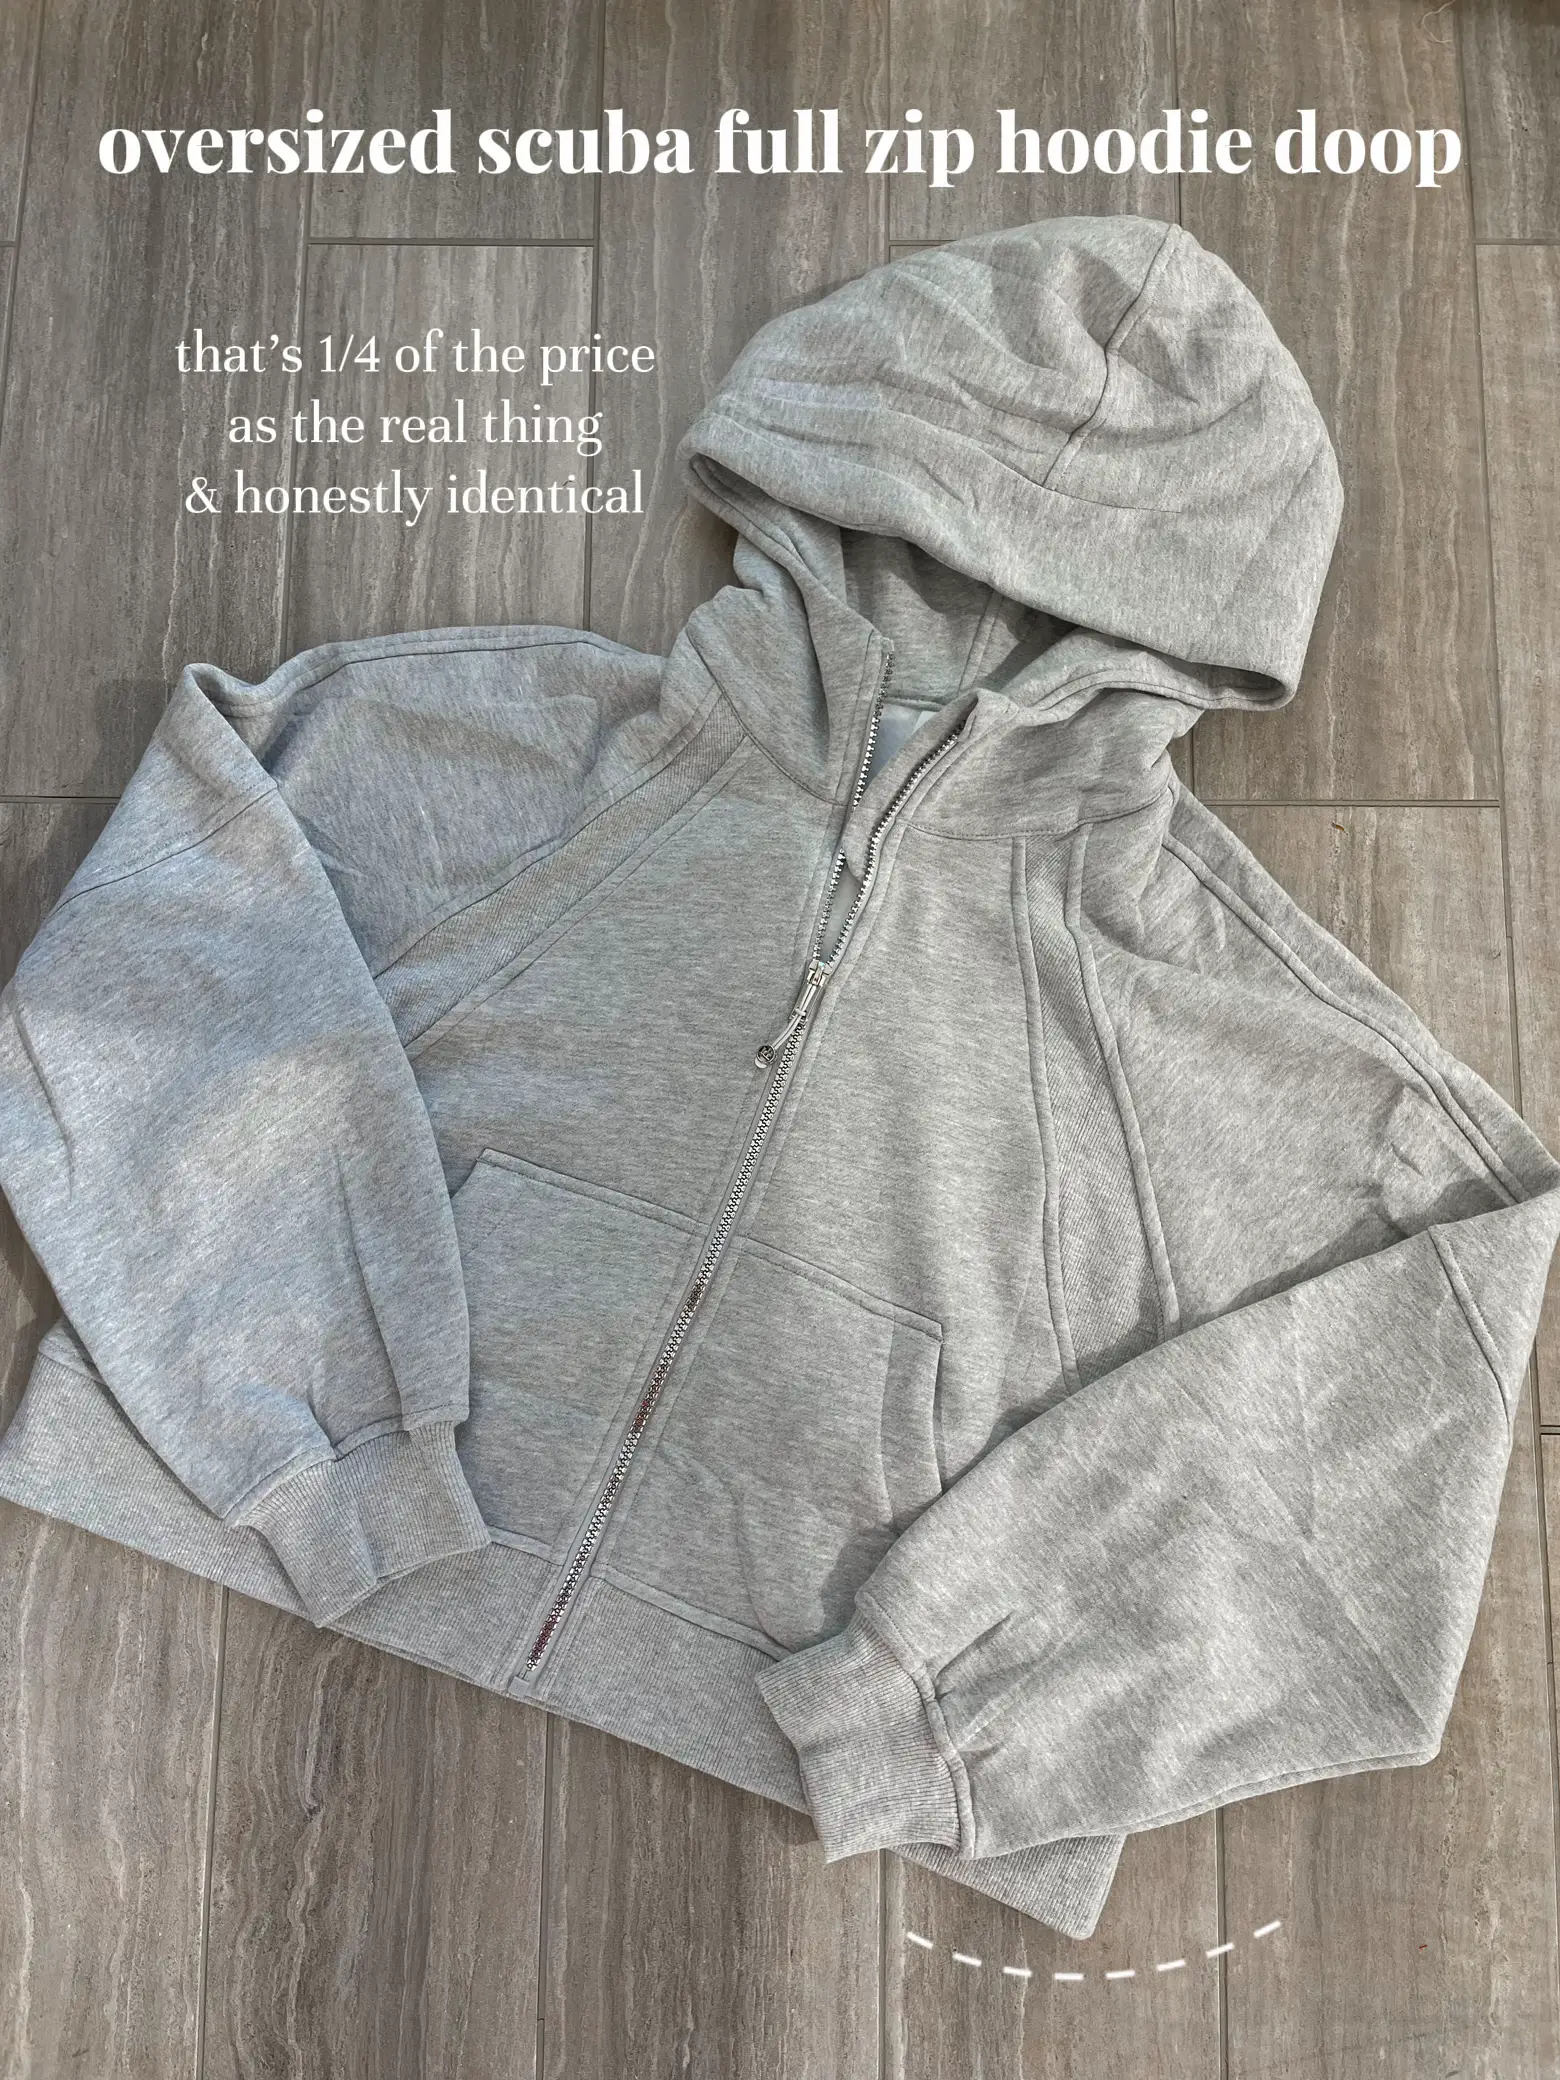 Incognito Camo Multi Grey Scuba Hoodie does not match Wunder